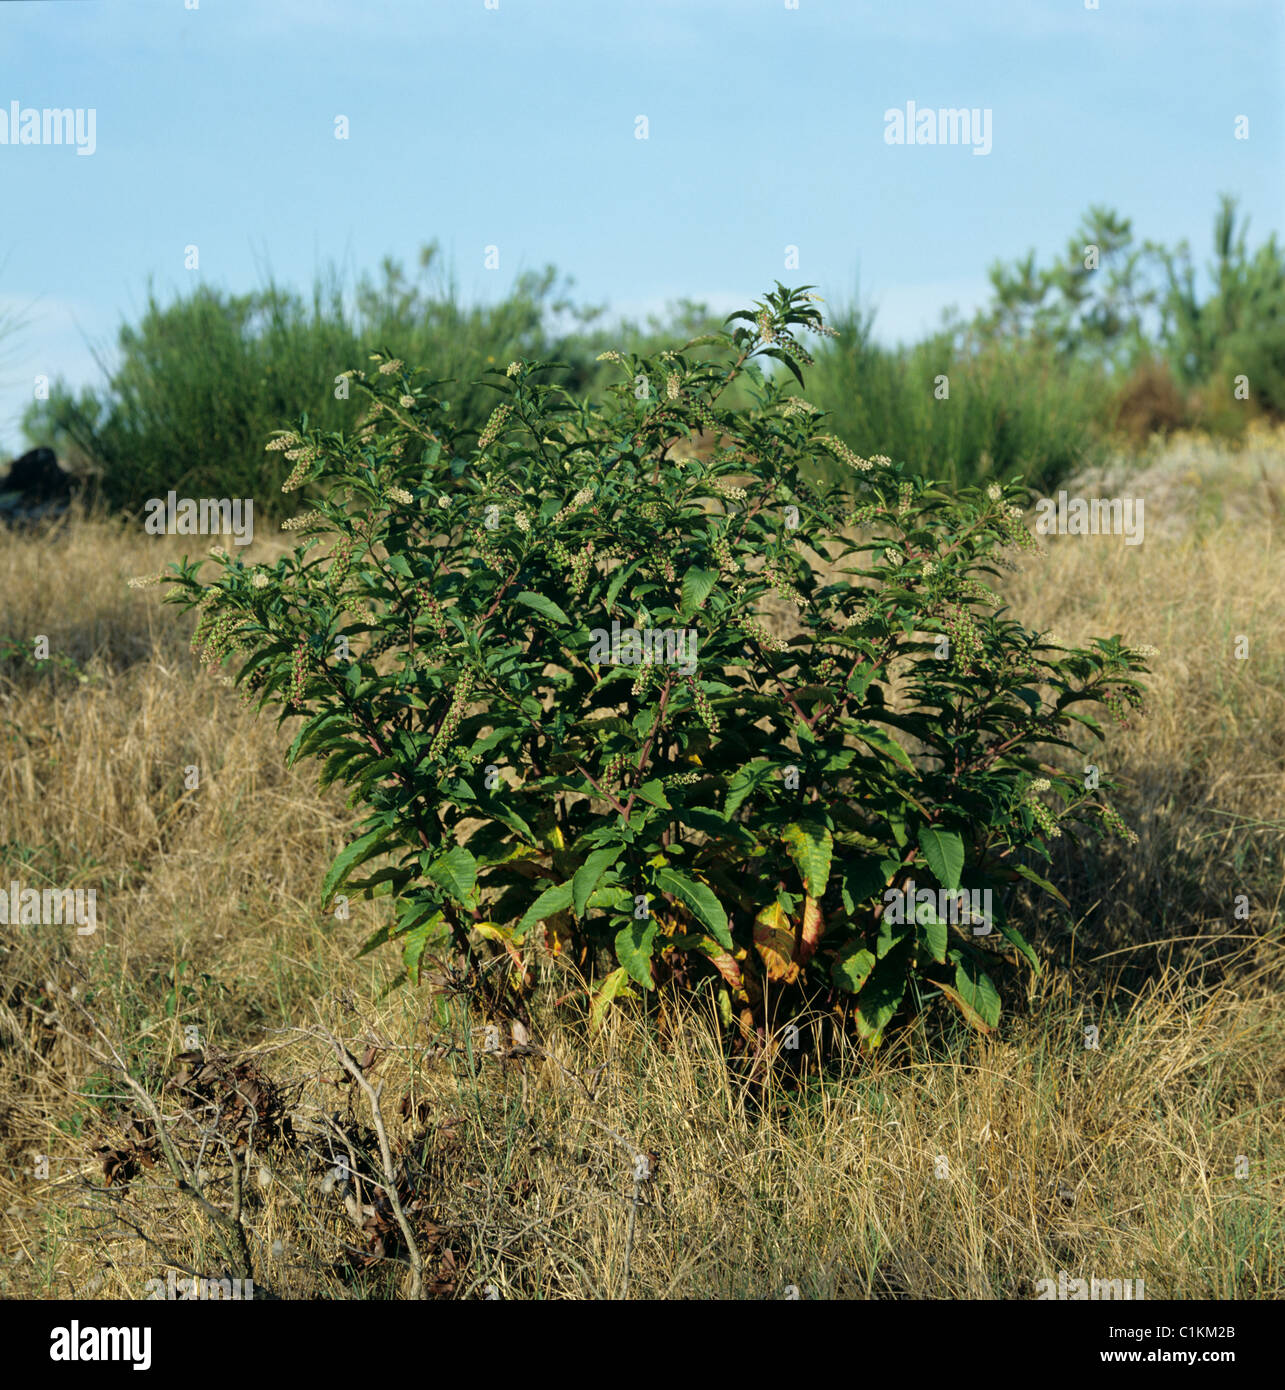 Common pokeweed (Phytolacca americana) plant in flower and seeding, France Stock Photo